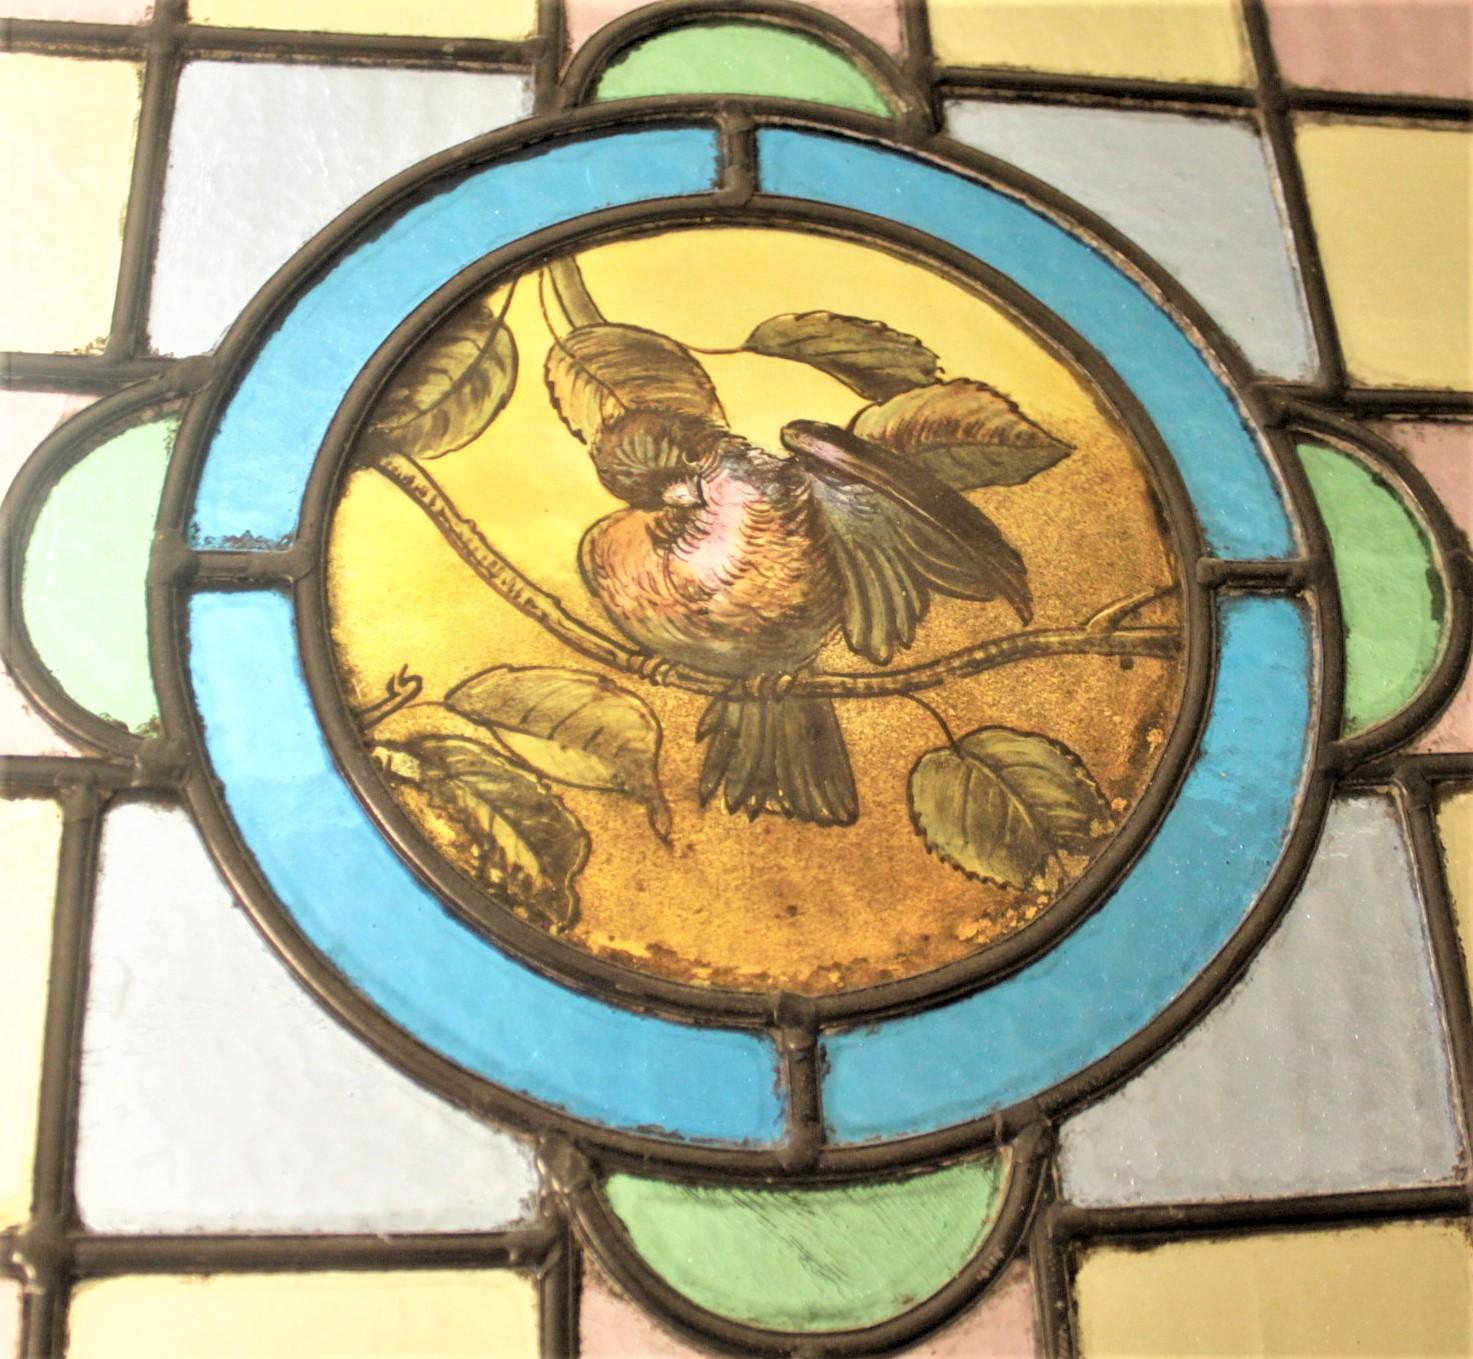 High Victorian Antique Framed Victorian Stained Glass Window with a Hand Painted Bird Medallion